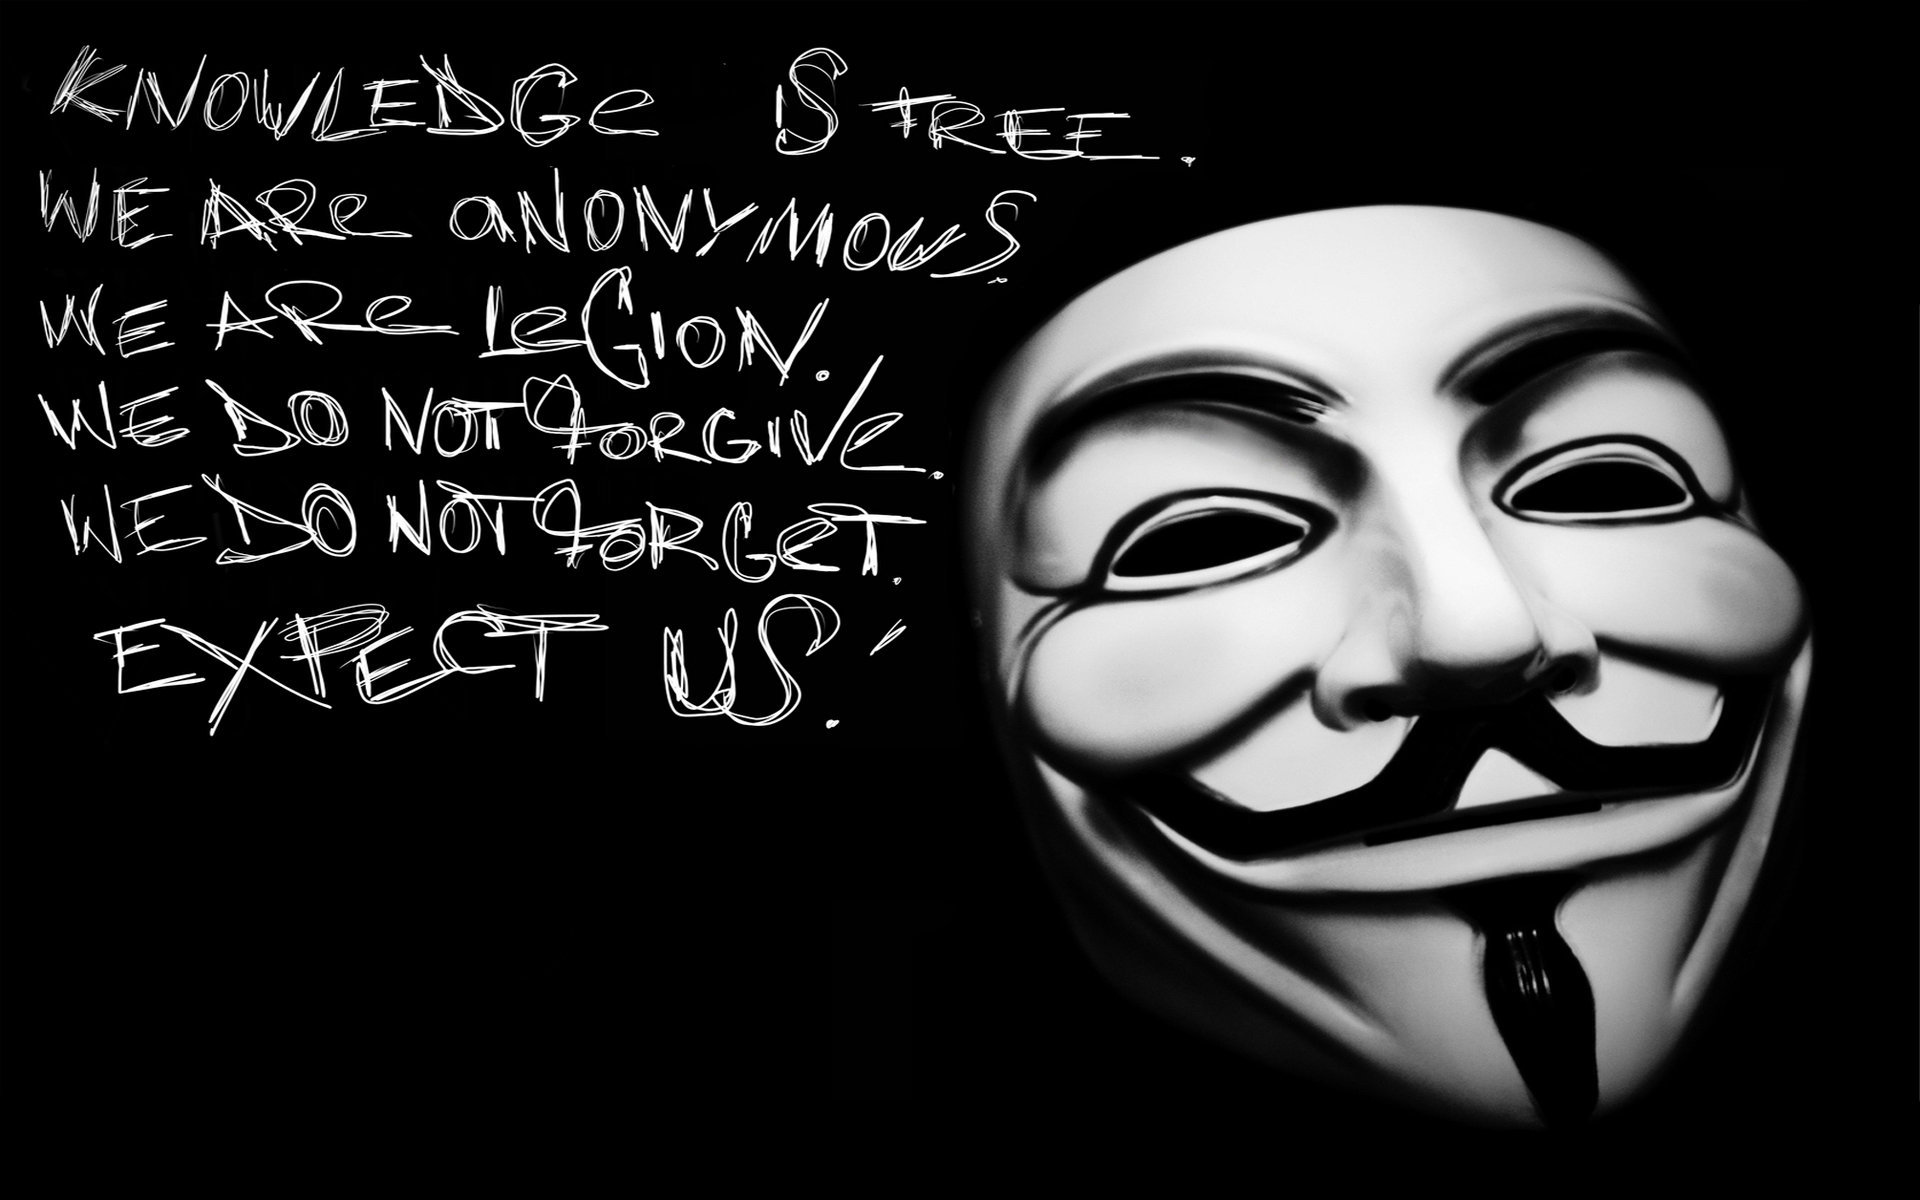 Download Anonymous Wallpaper Hd 1920x1200 23953 Full Size 1920x1200